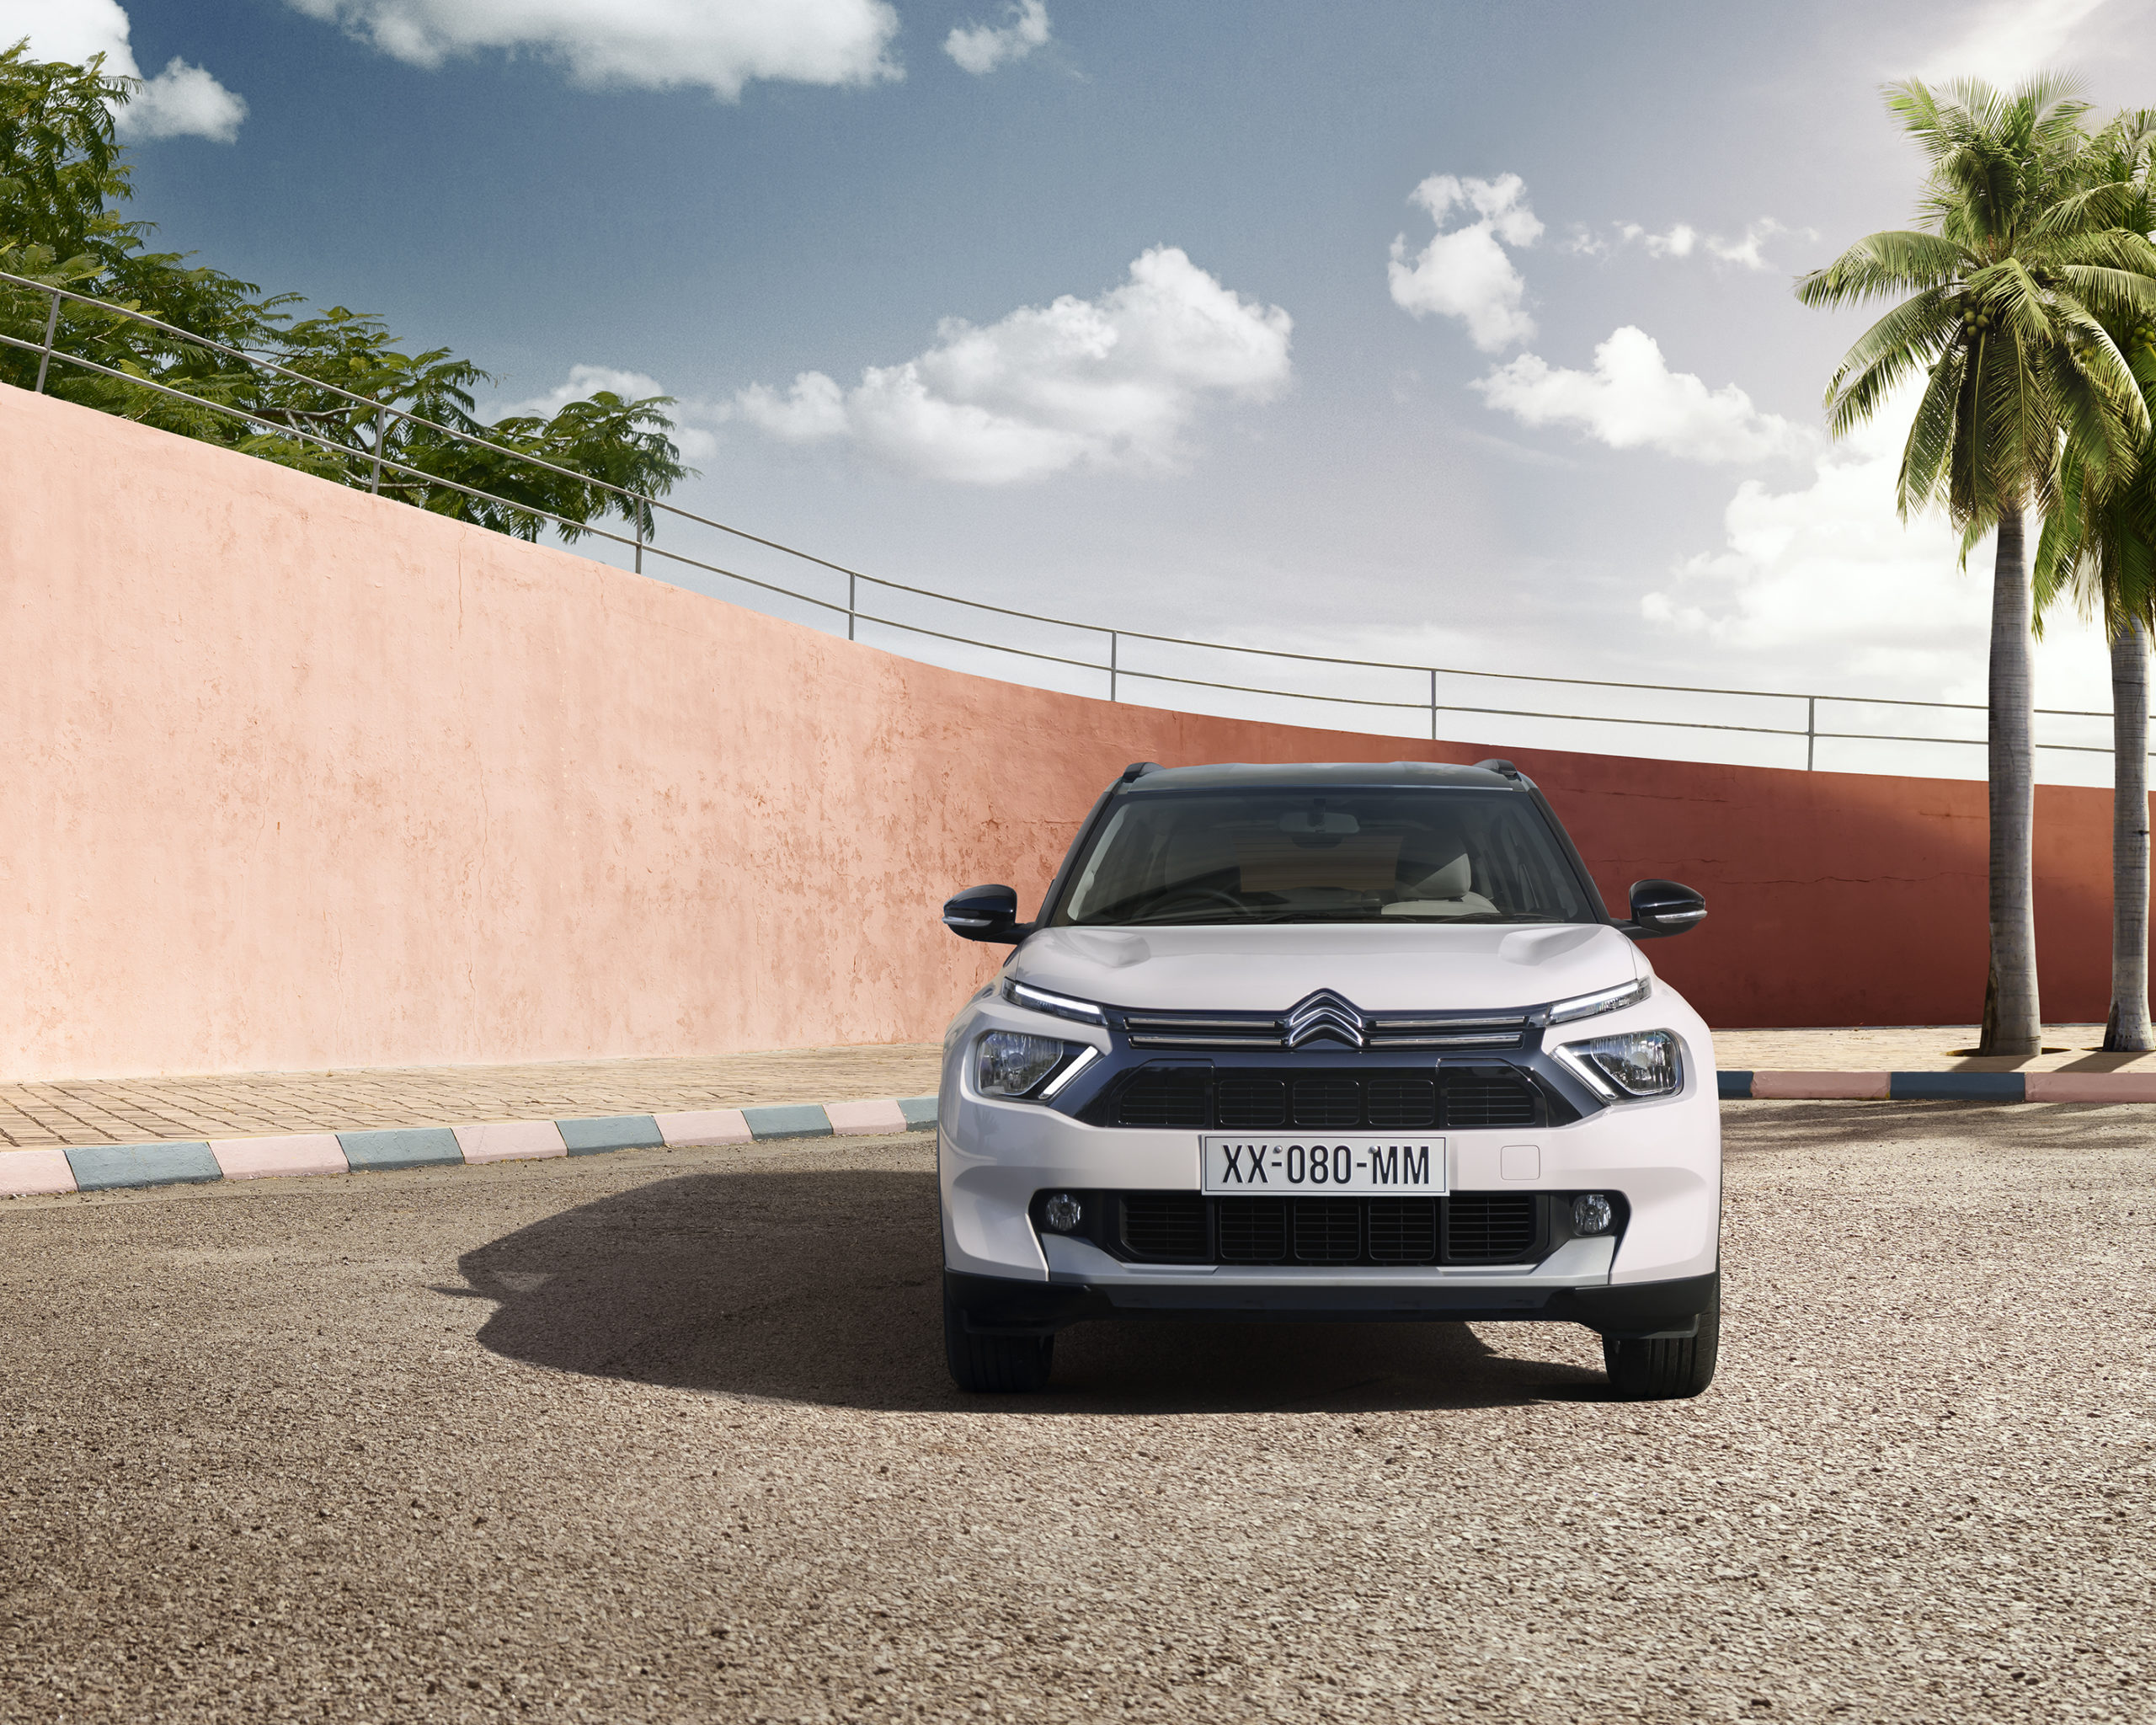 Citroen India C3 Aircross mid-size SUV: Detailed Image gallery